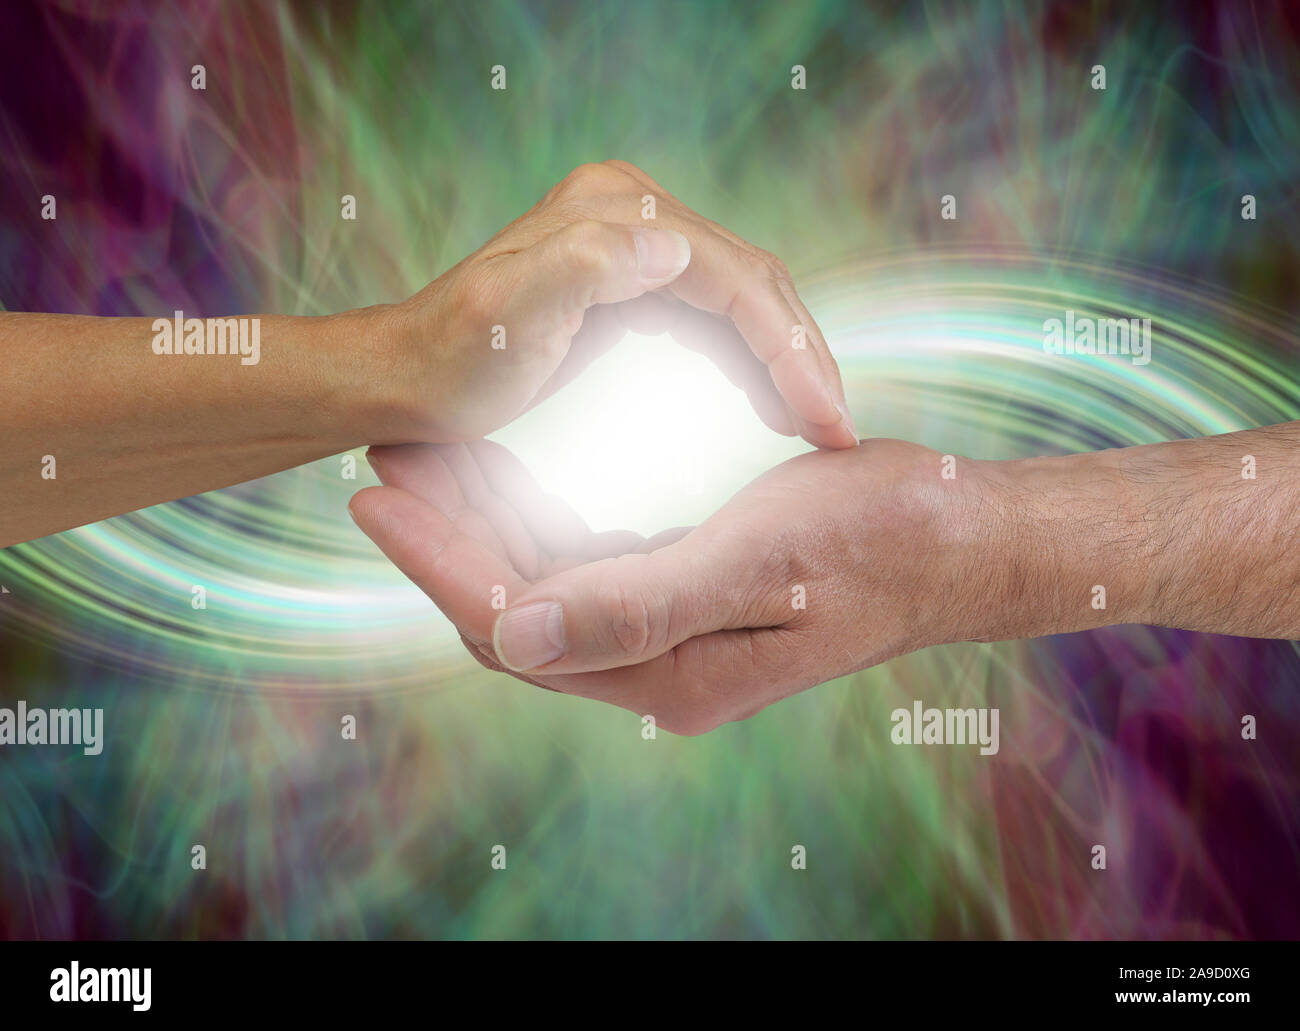 Together our energy is stronger - female hand cupped over a male cupped hand with a bright white orb light between flowing out either side Stock Photo